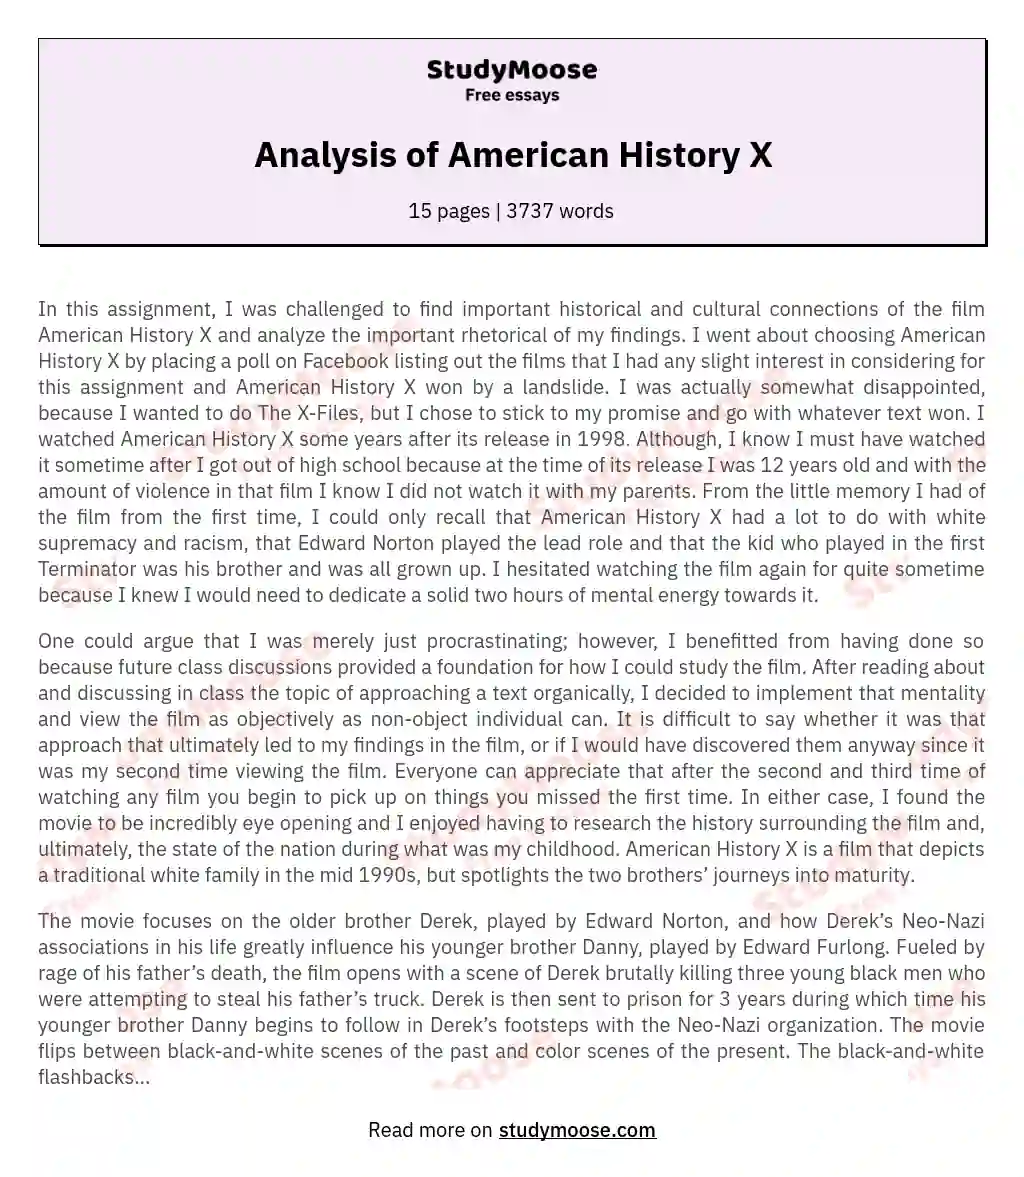 Analyzing American History X: Racism, Influence, and Critical Thinking essay